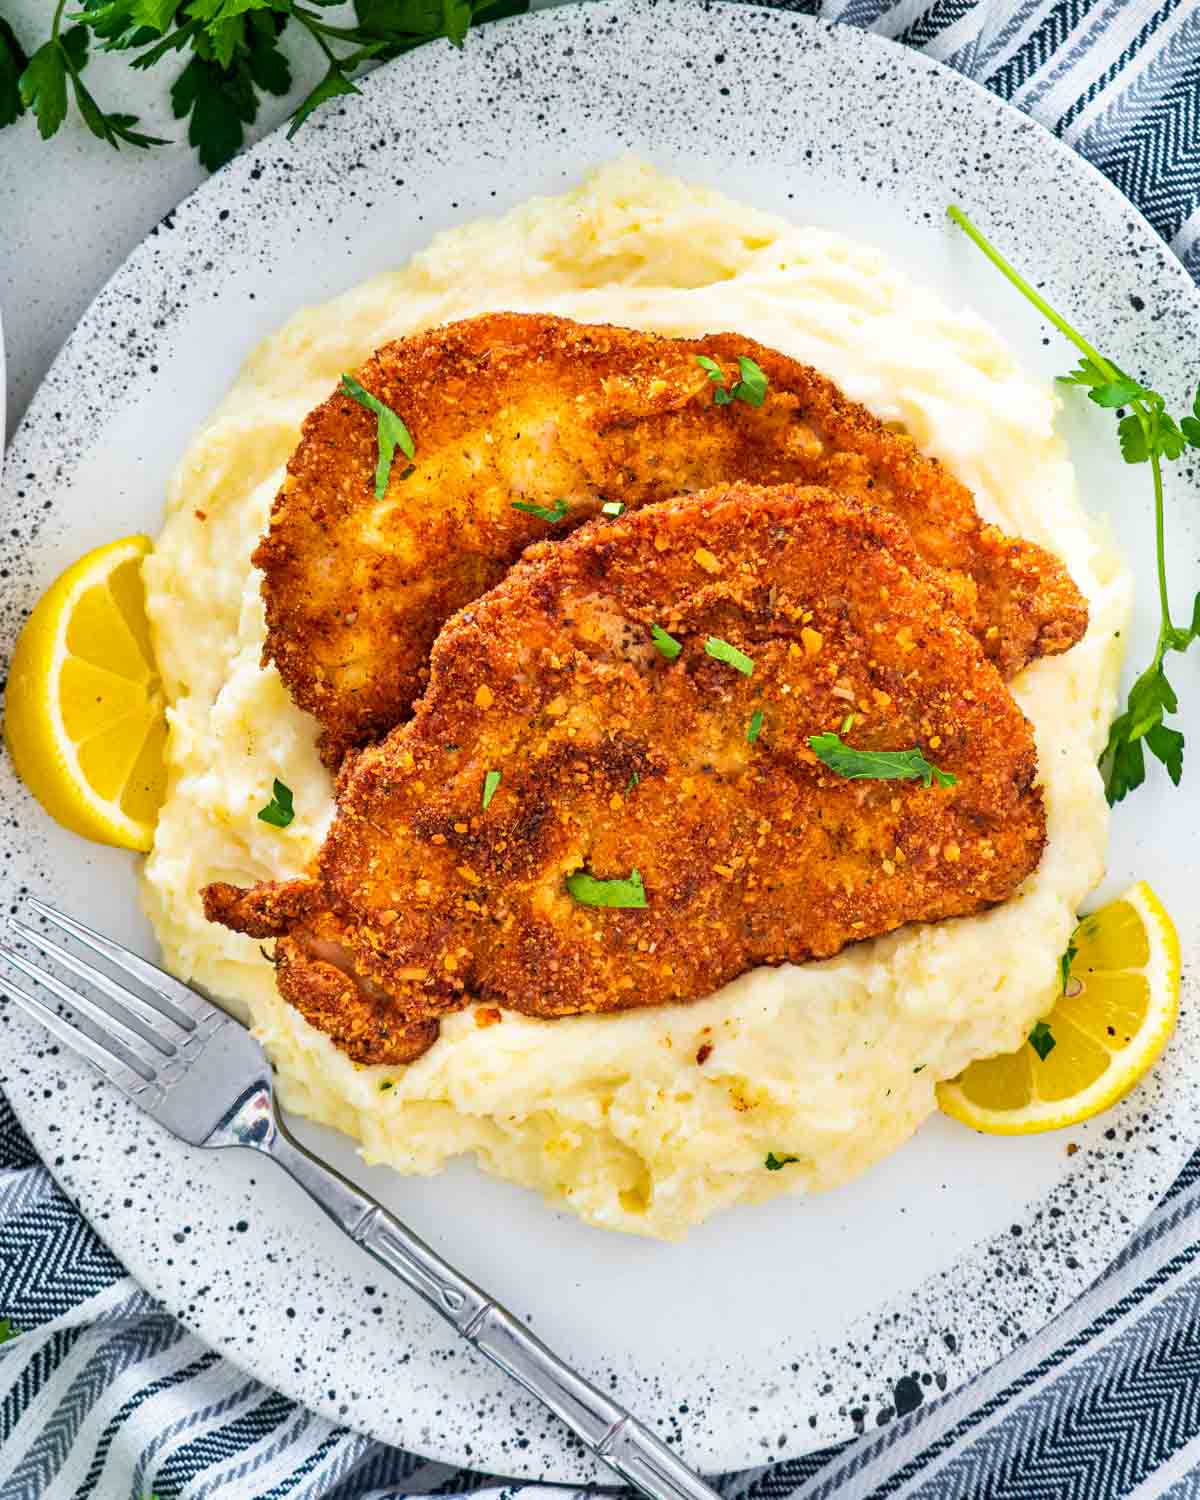 2 pork schnitzel over a bed of mashed potatoes on a plate.